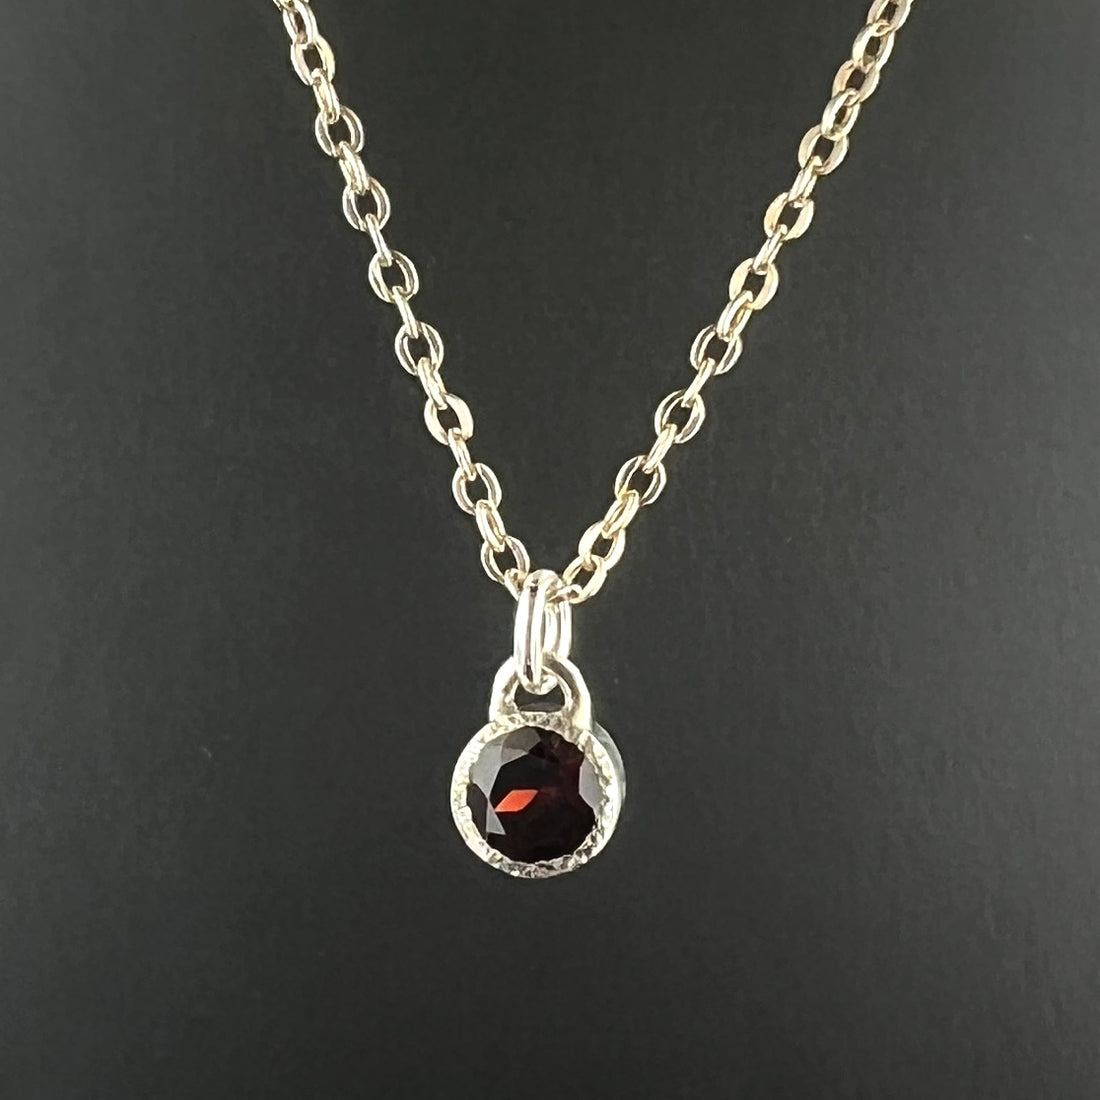 Garnets are for January